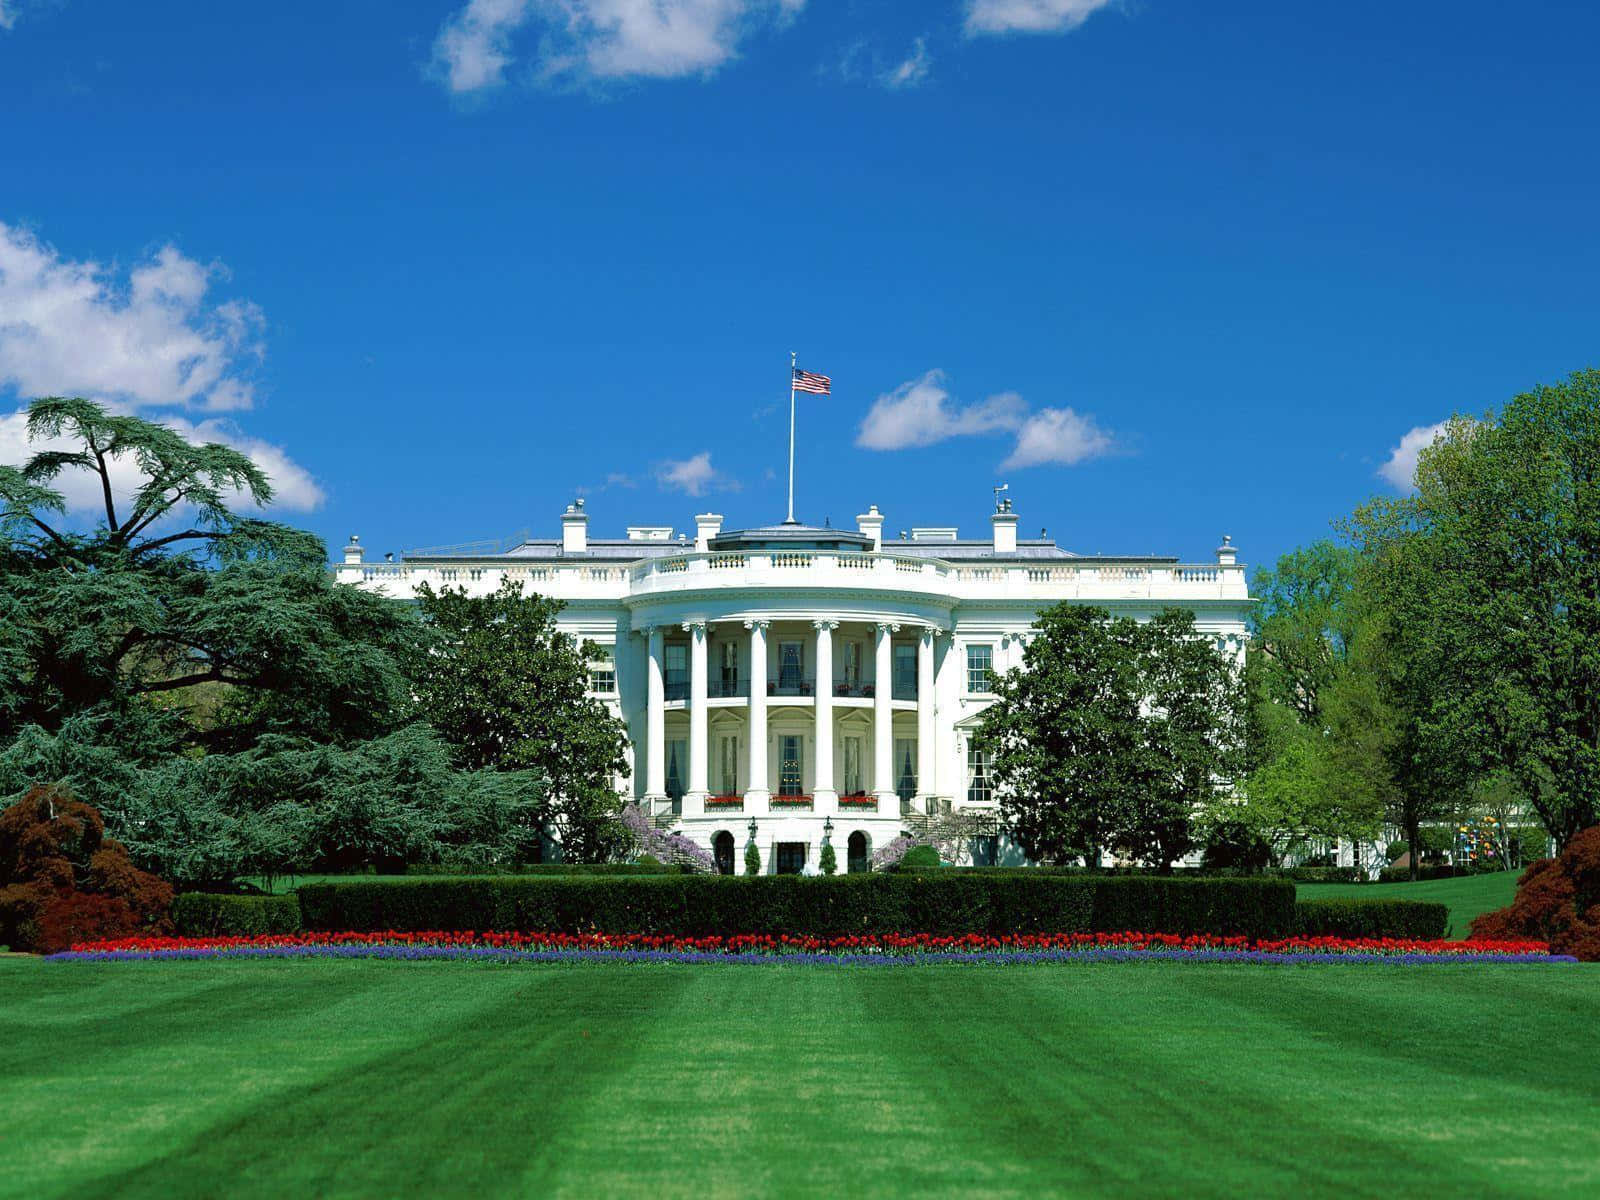 The White House Is In The Middle Of The Lawn